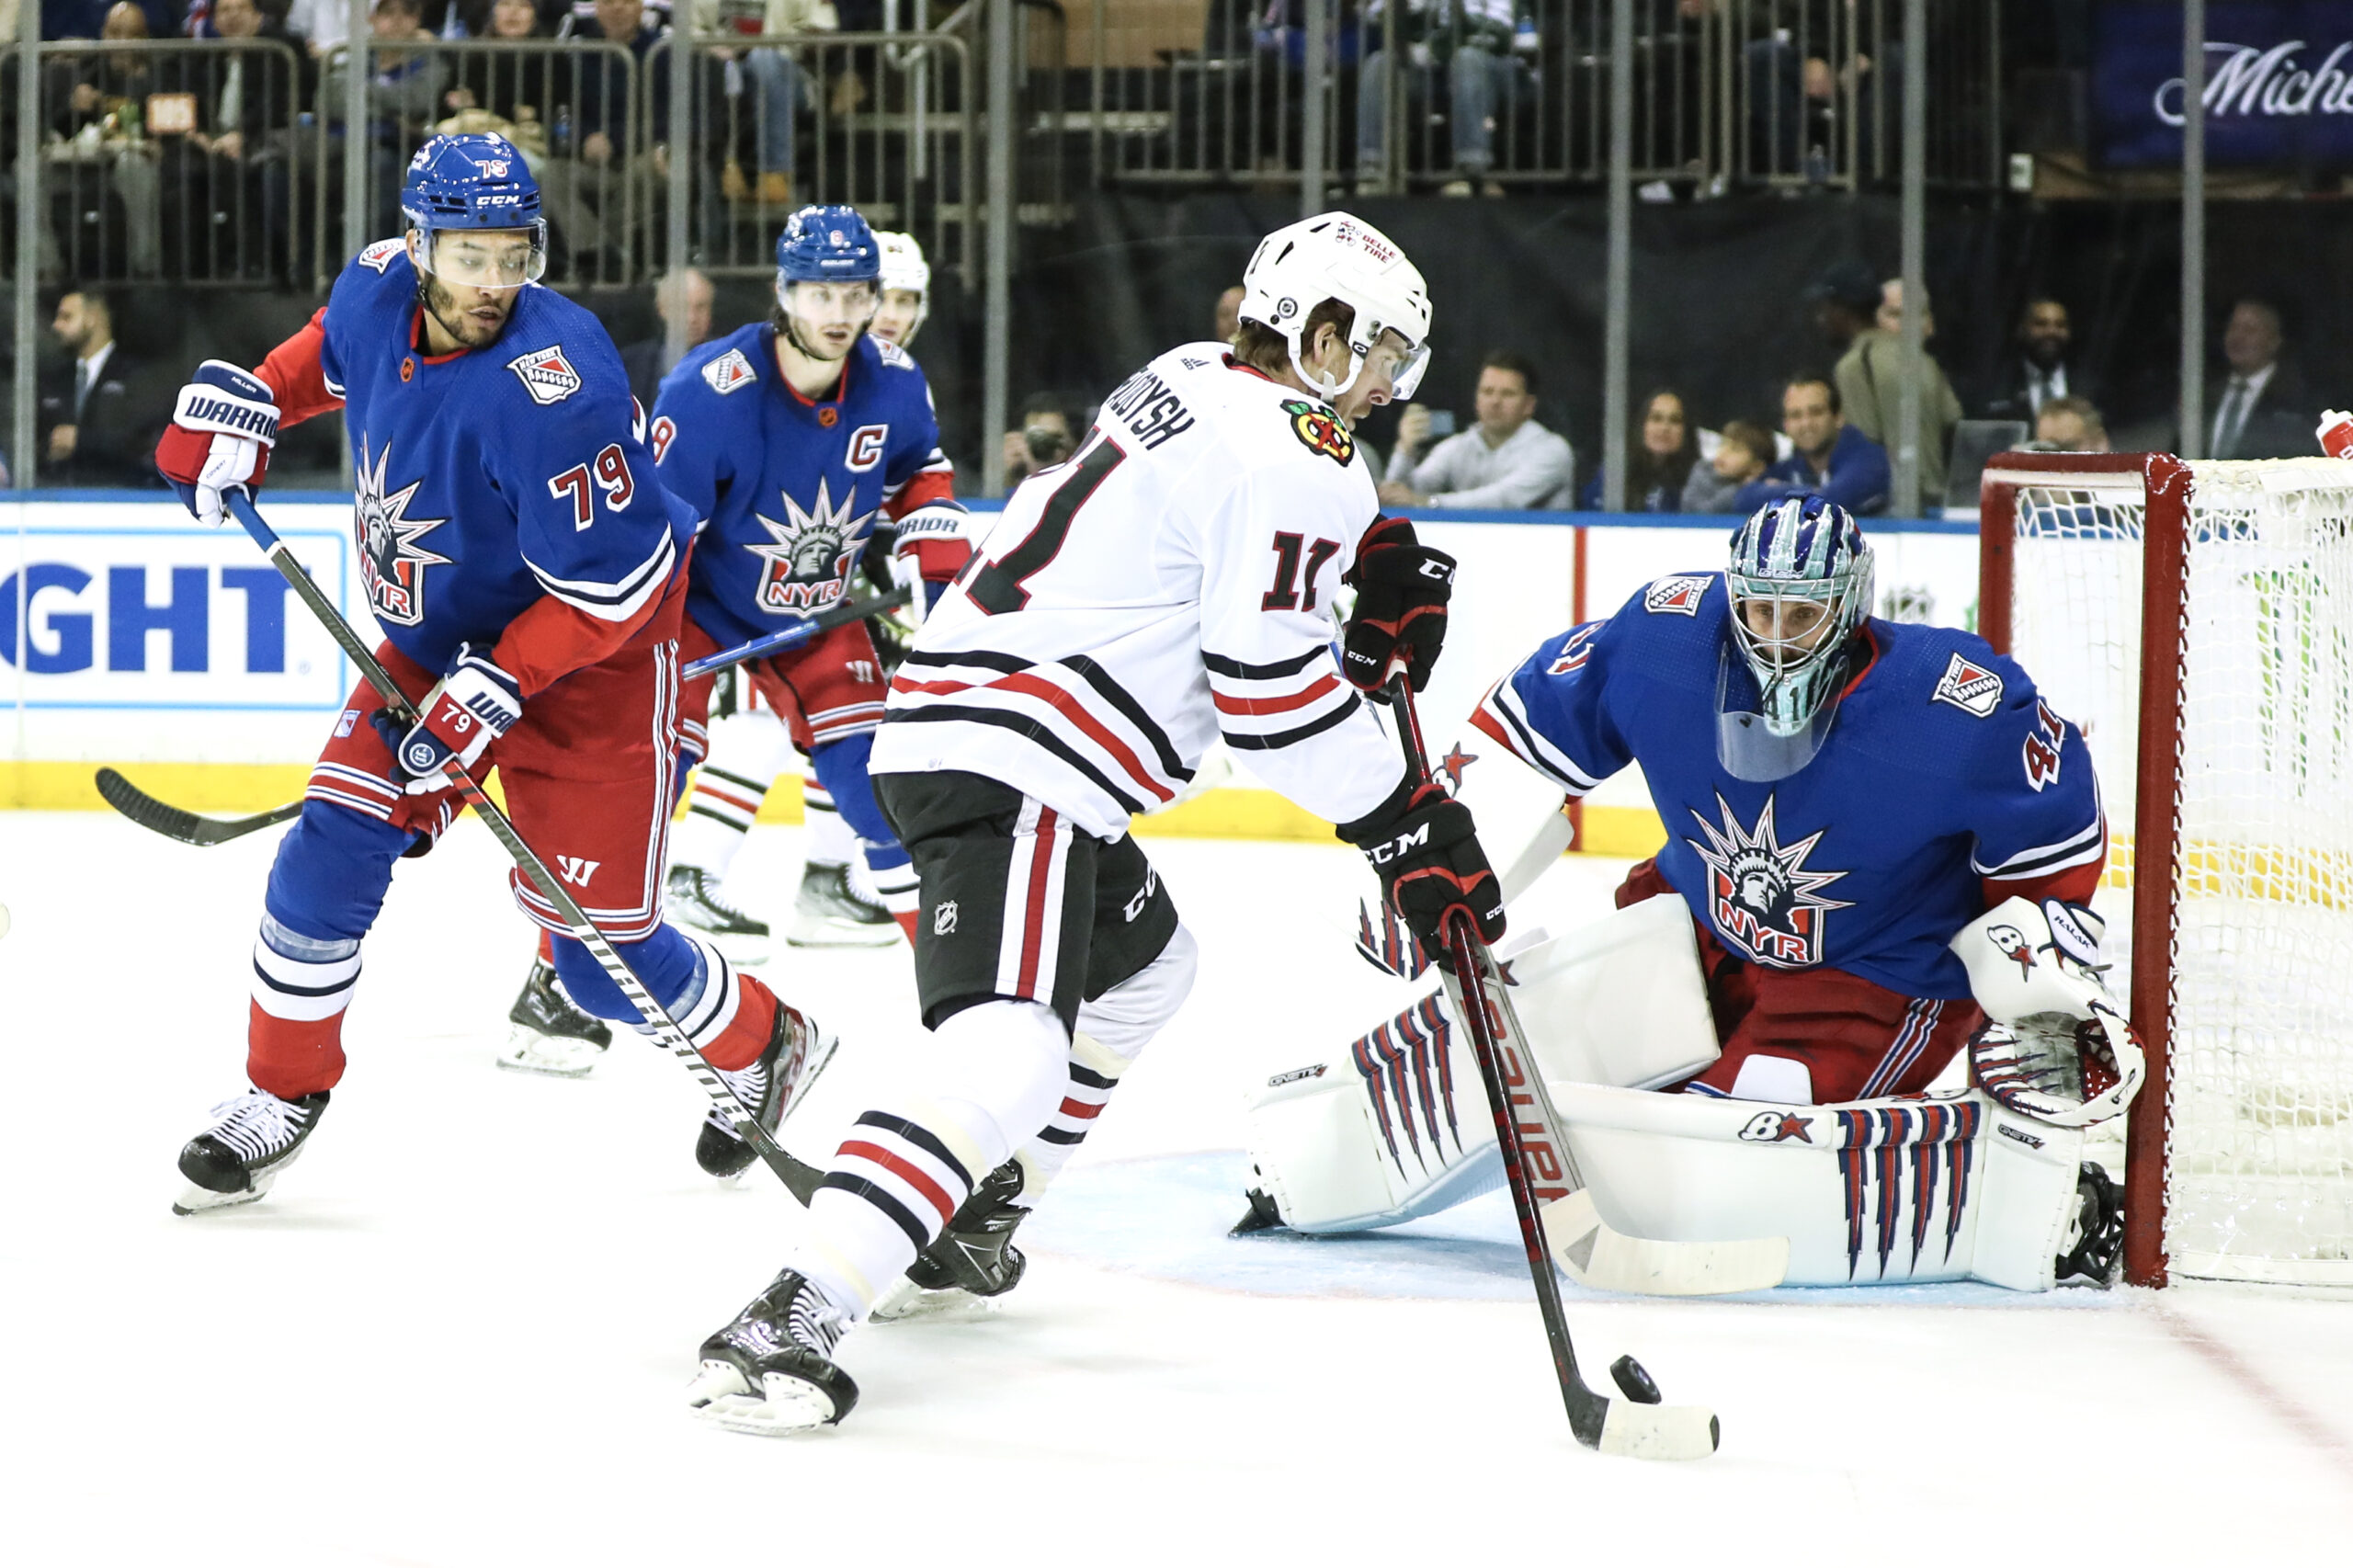 Patrick Kane in town to face struggling Rangers with trade rumors swirling